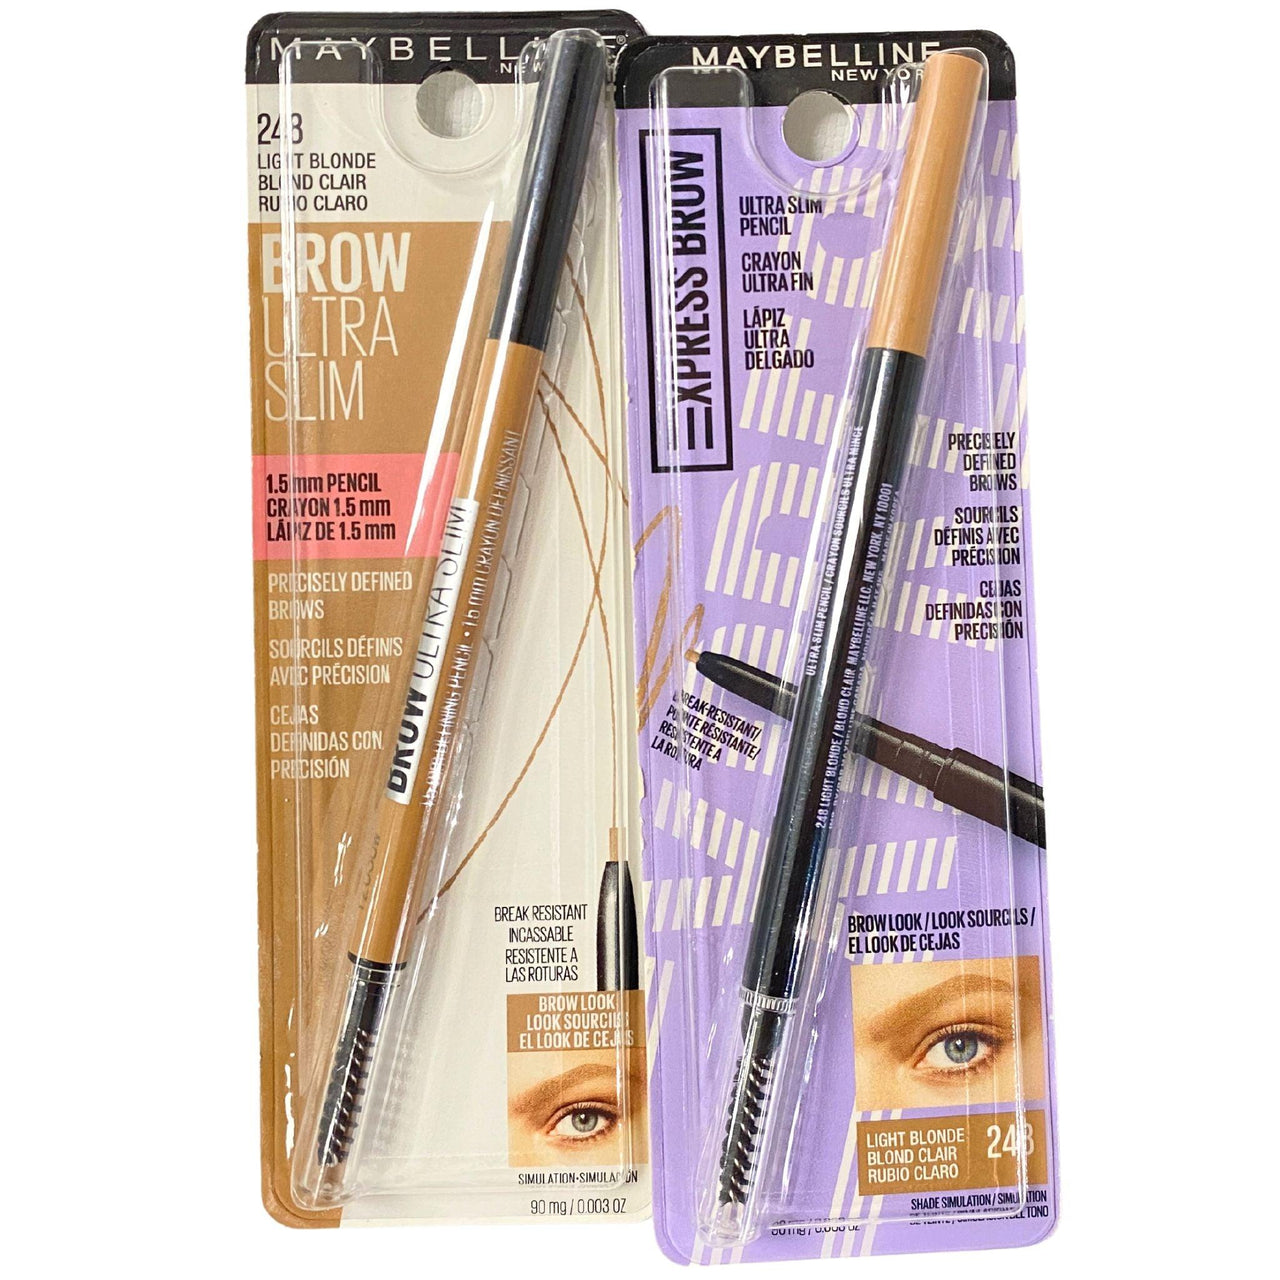 Maybelline Ultra Slim Brow Pencil for Precisely Defined Brows (50 Pcs Lot) - Discount Wholesalers Inc